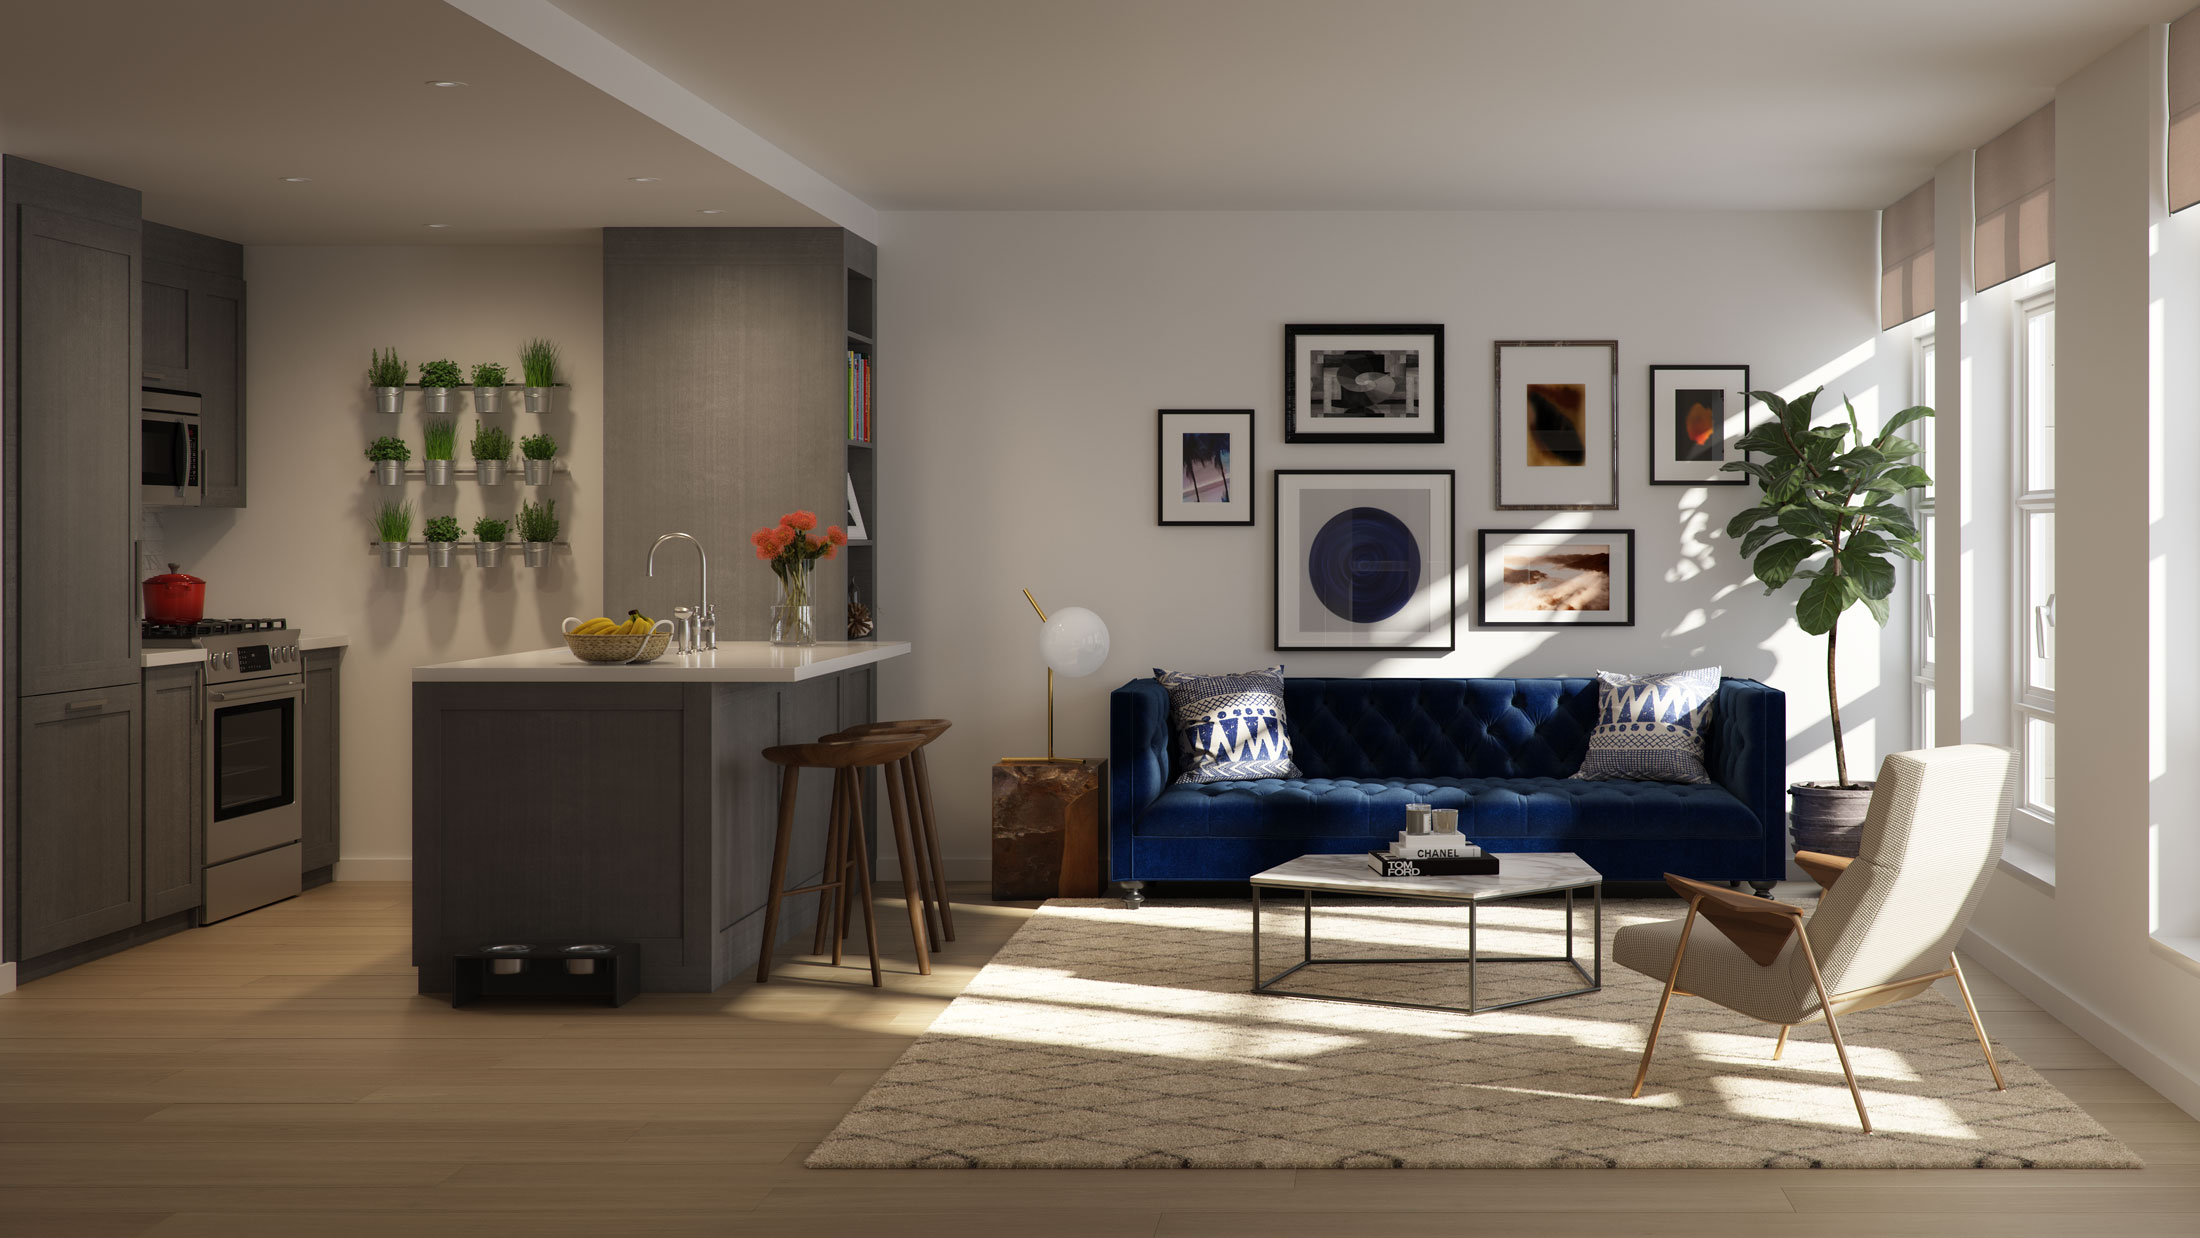 Architectural Rendering of the living room of the 261 Hudson project located in West Soho, New York City